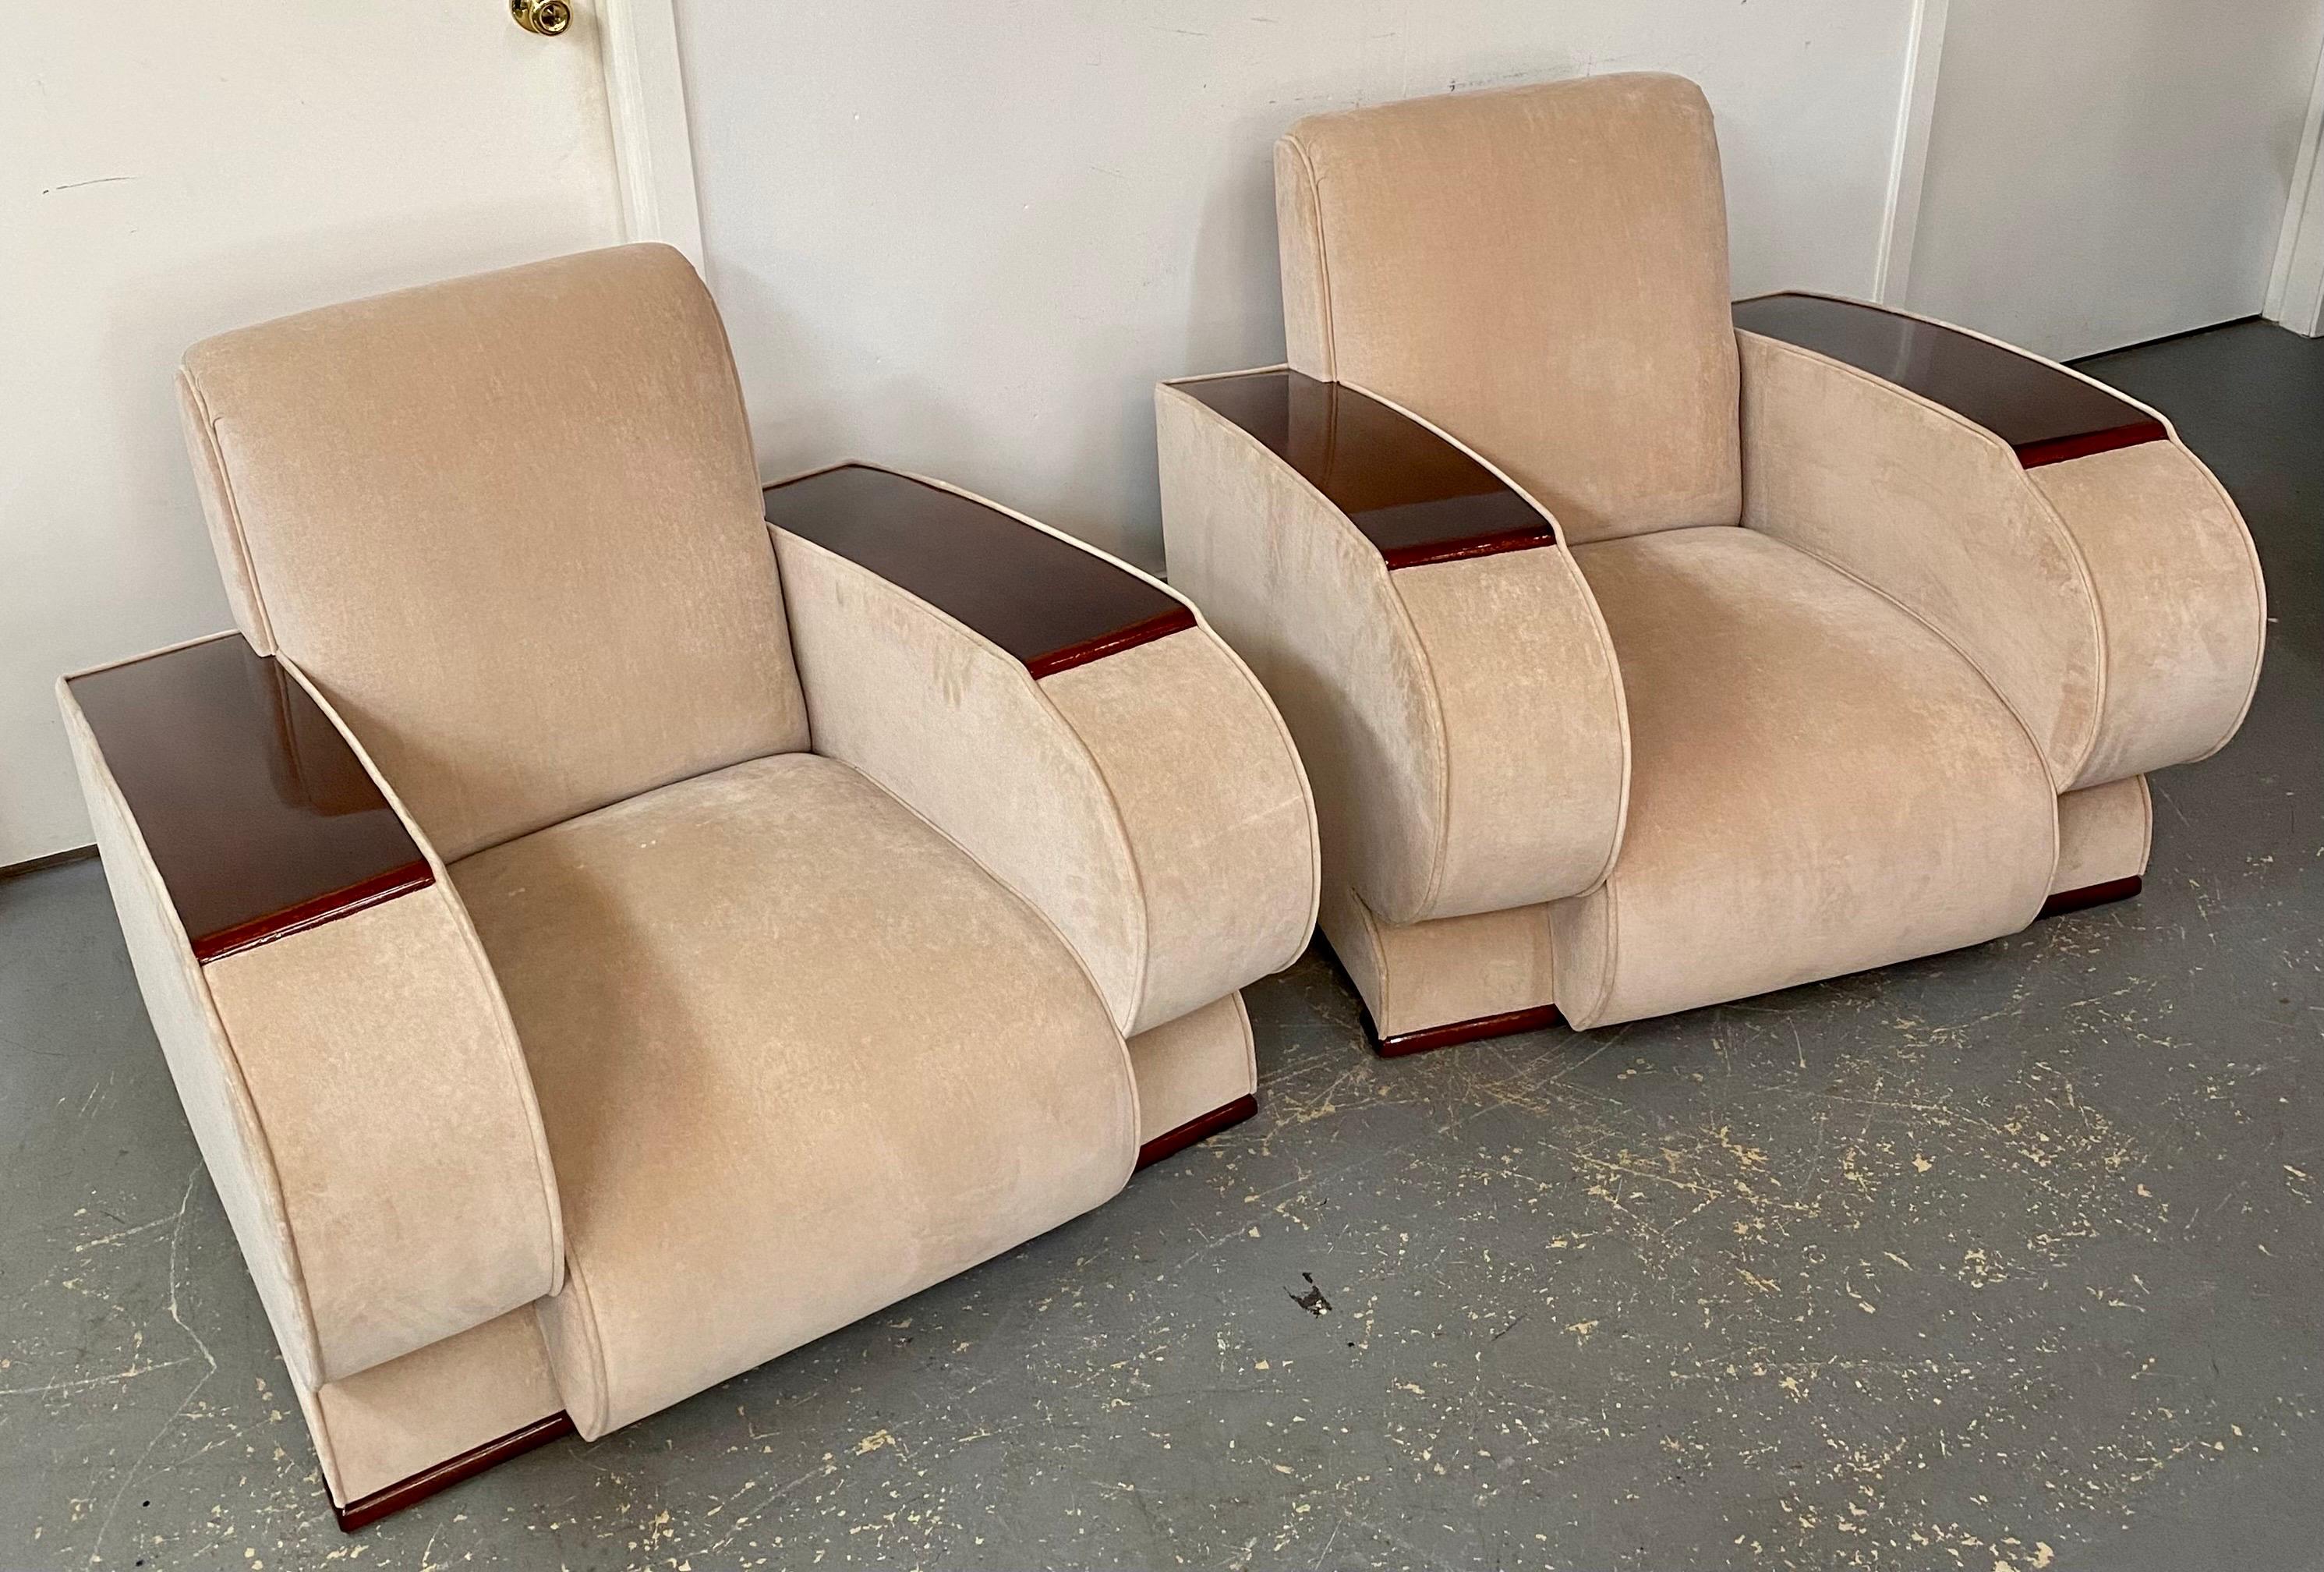 French Art Deco Club or Lounge Chair in Beige Suede Upholstery, a Pair  In Good Condition For Sale In Plainview, NY